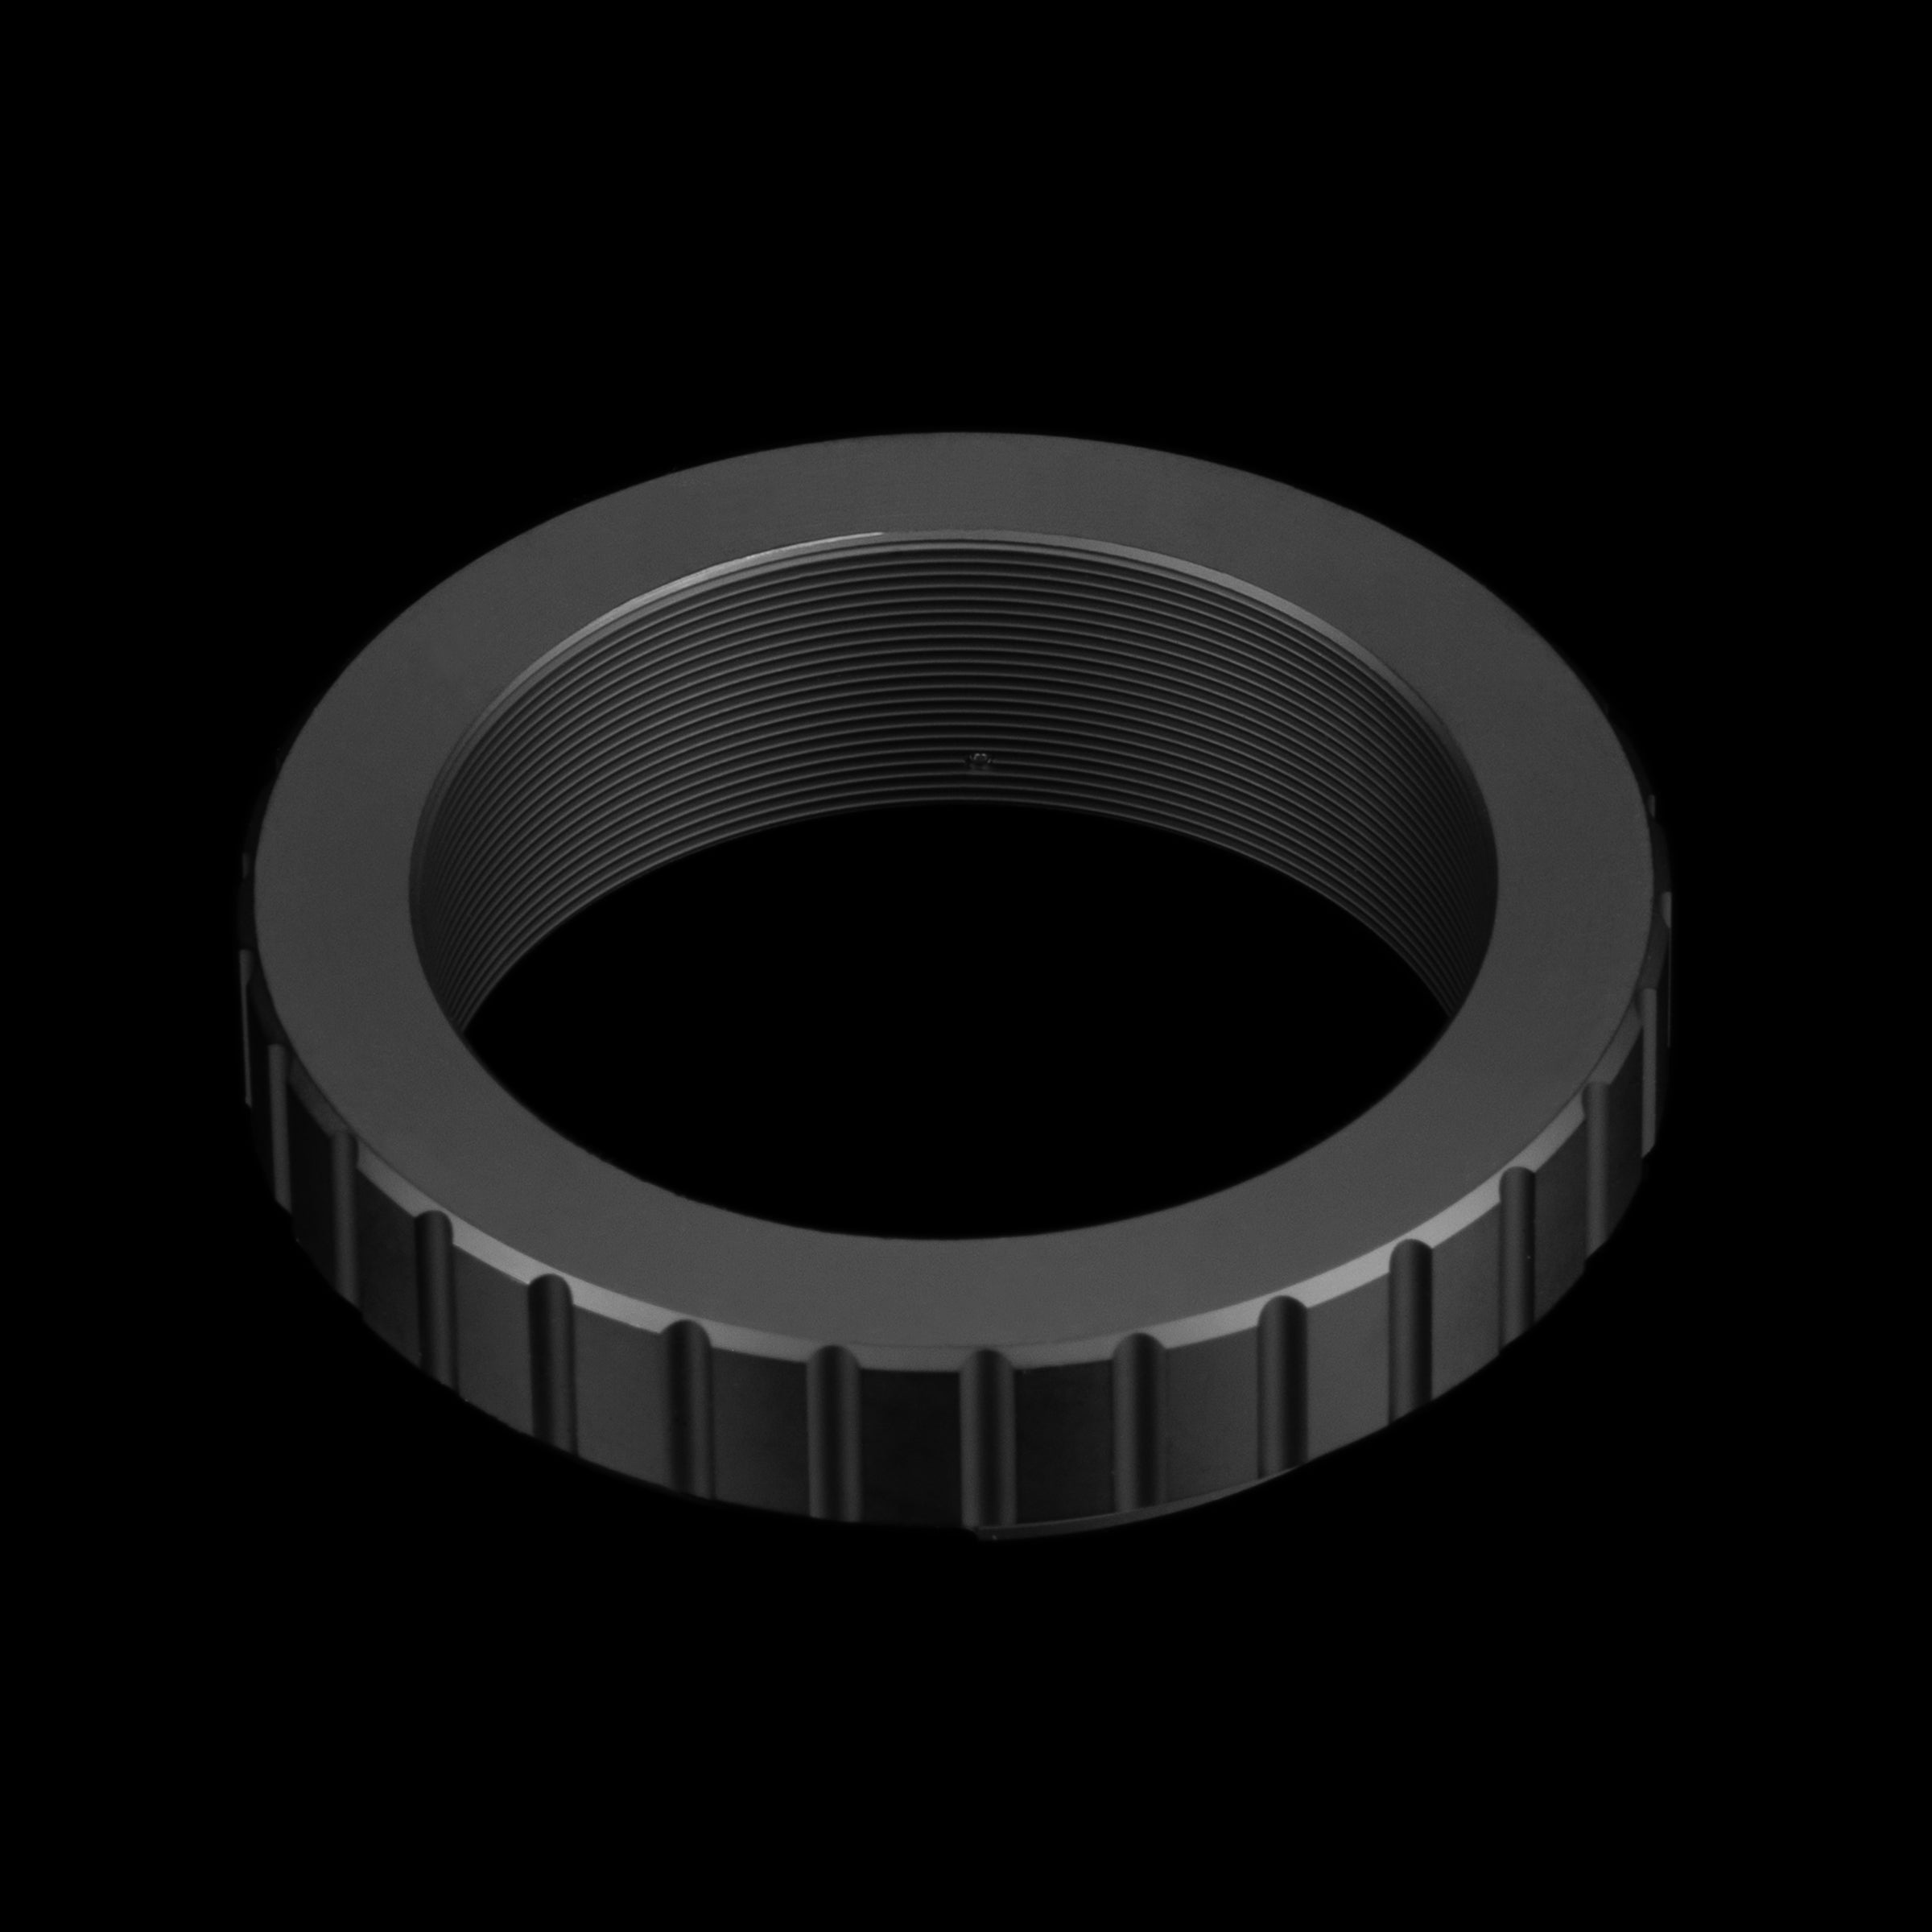 48mm T mount for Canon EOS